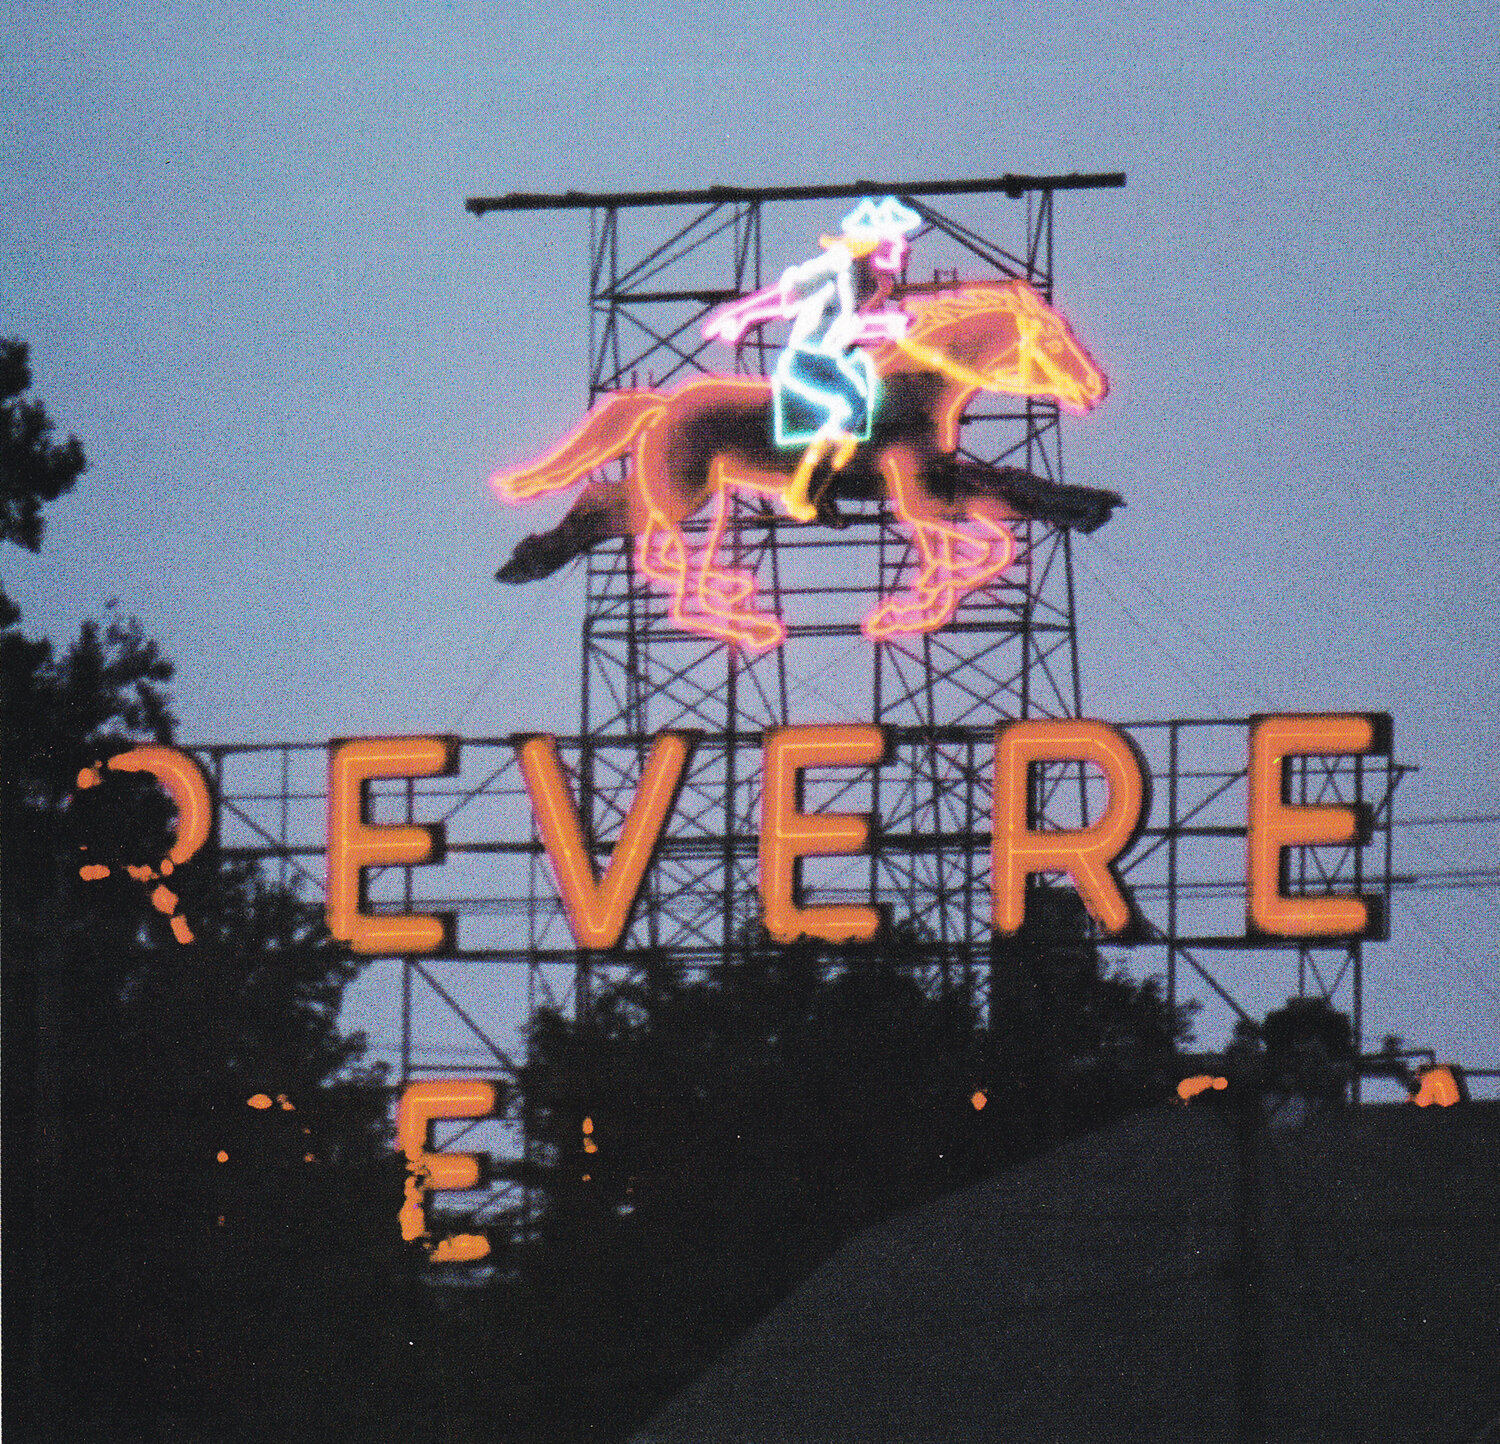 The Paul Revere sign as it looked in 2001, bright and colorful atop Revere Copper Products. The lighting was animated to look as if the horse was running, helping patriot Paul Revere make his famous warning.